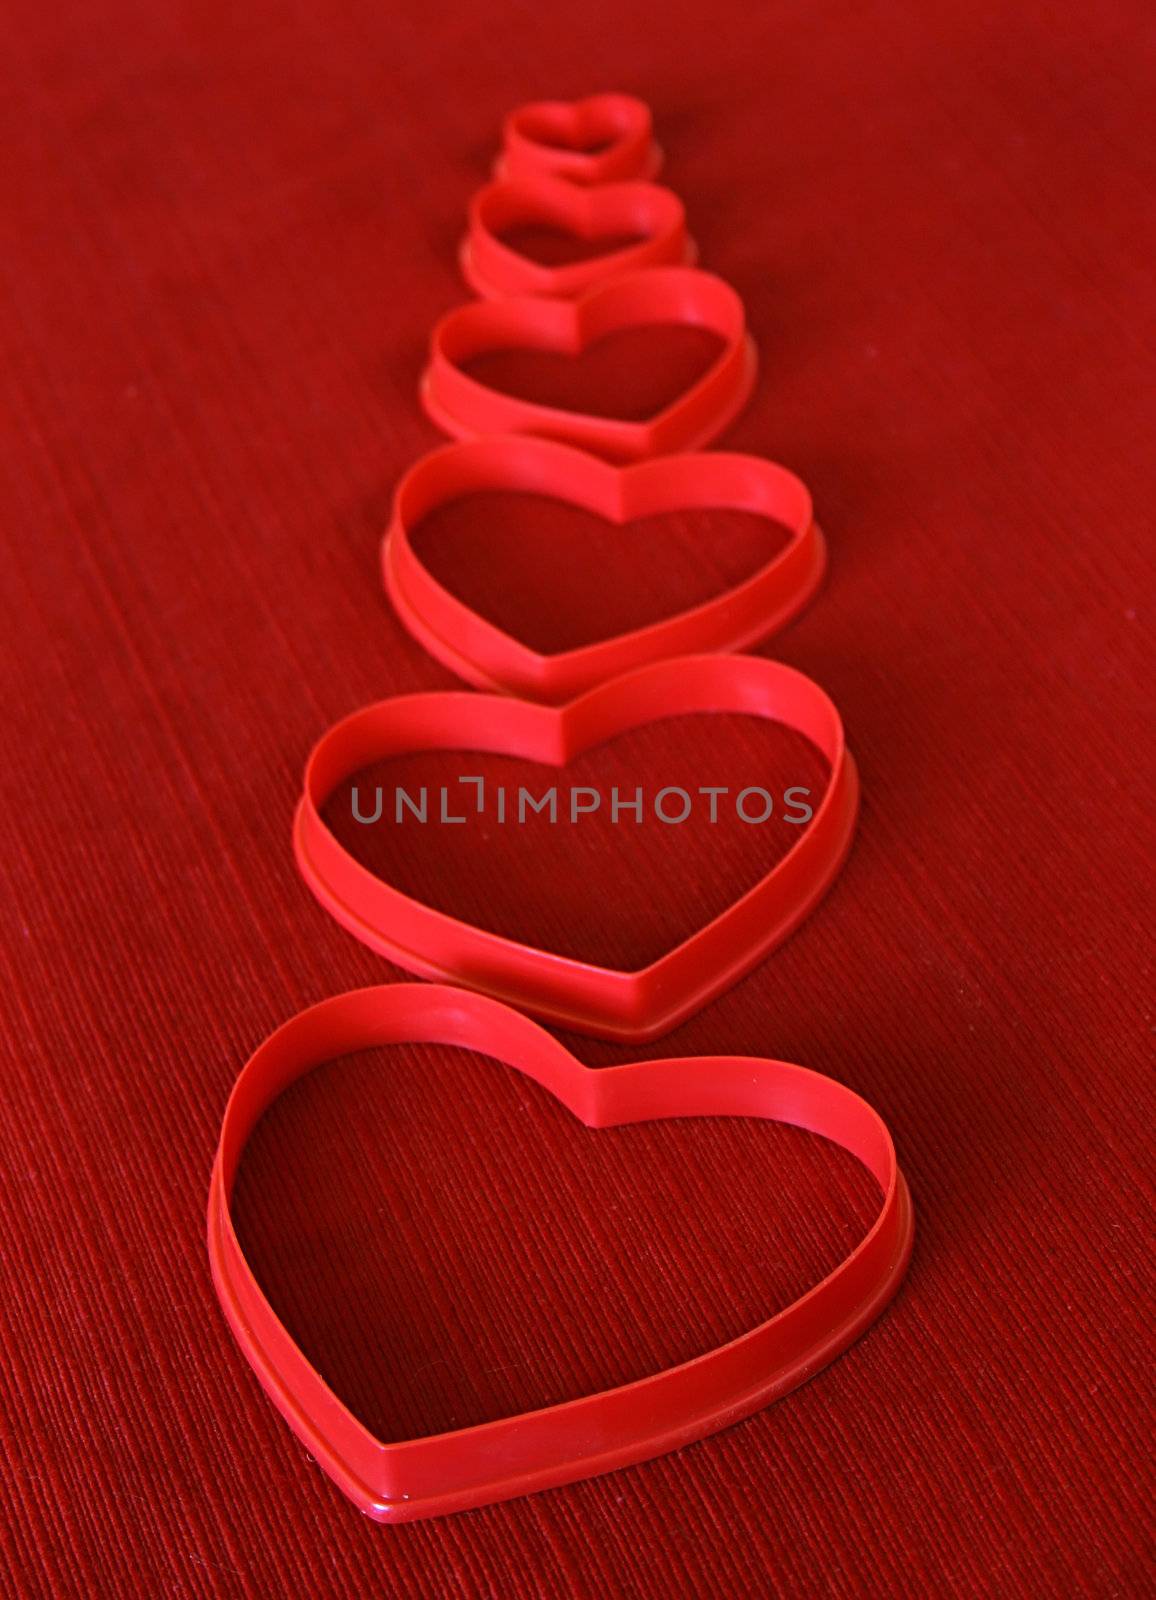 Cookie cutter hearts lined up on a red background.

